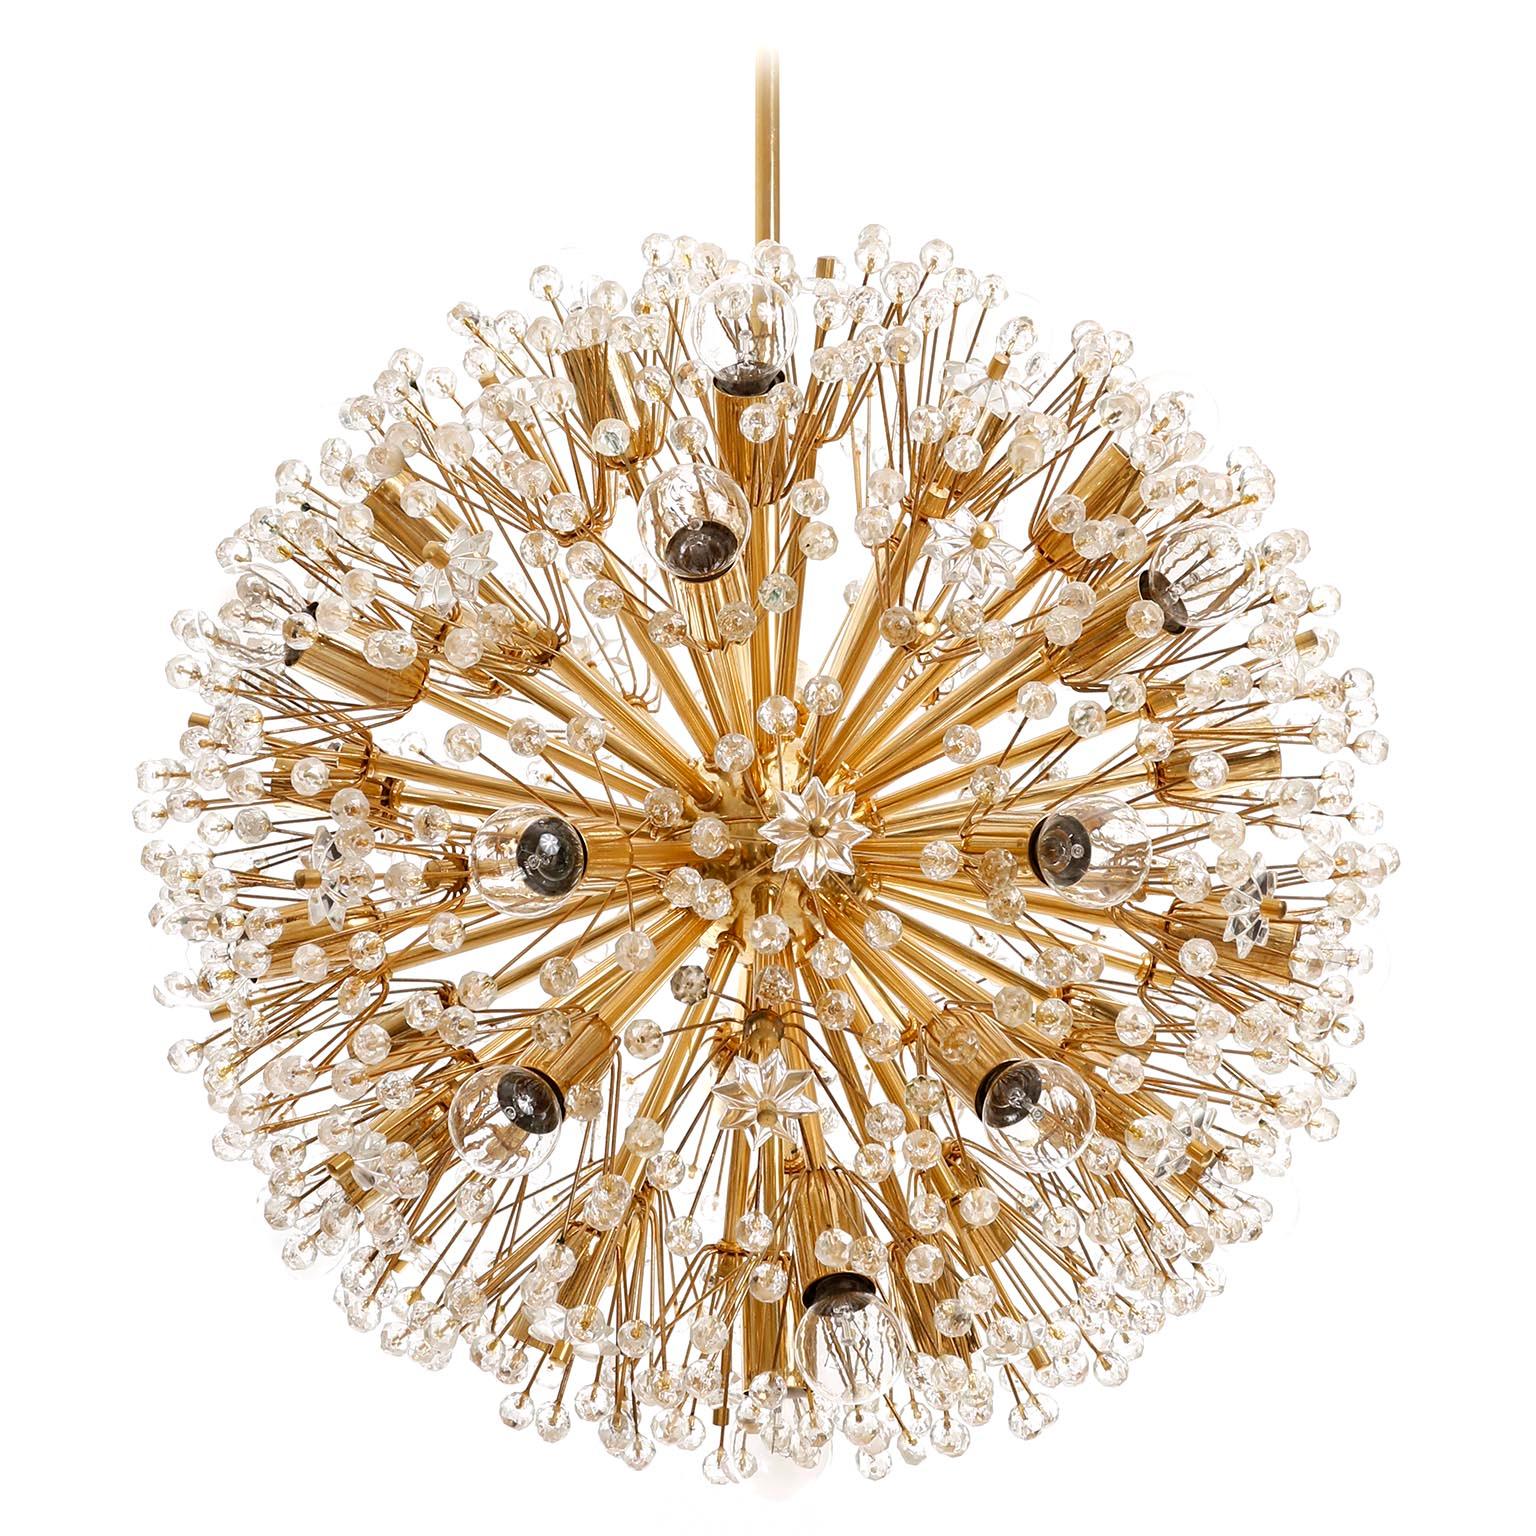 One of two large Sputnik chandeliers designed by Emil Stejnar and manufactured in midcentury, circa 1970.
This beautiful light fixture is made of a 24-carat gold-plated brass frame which is decorated with cut glass in the form of beads and stars.